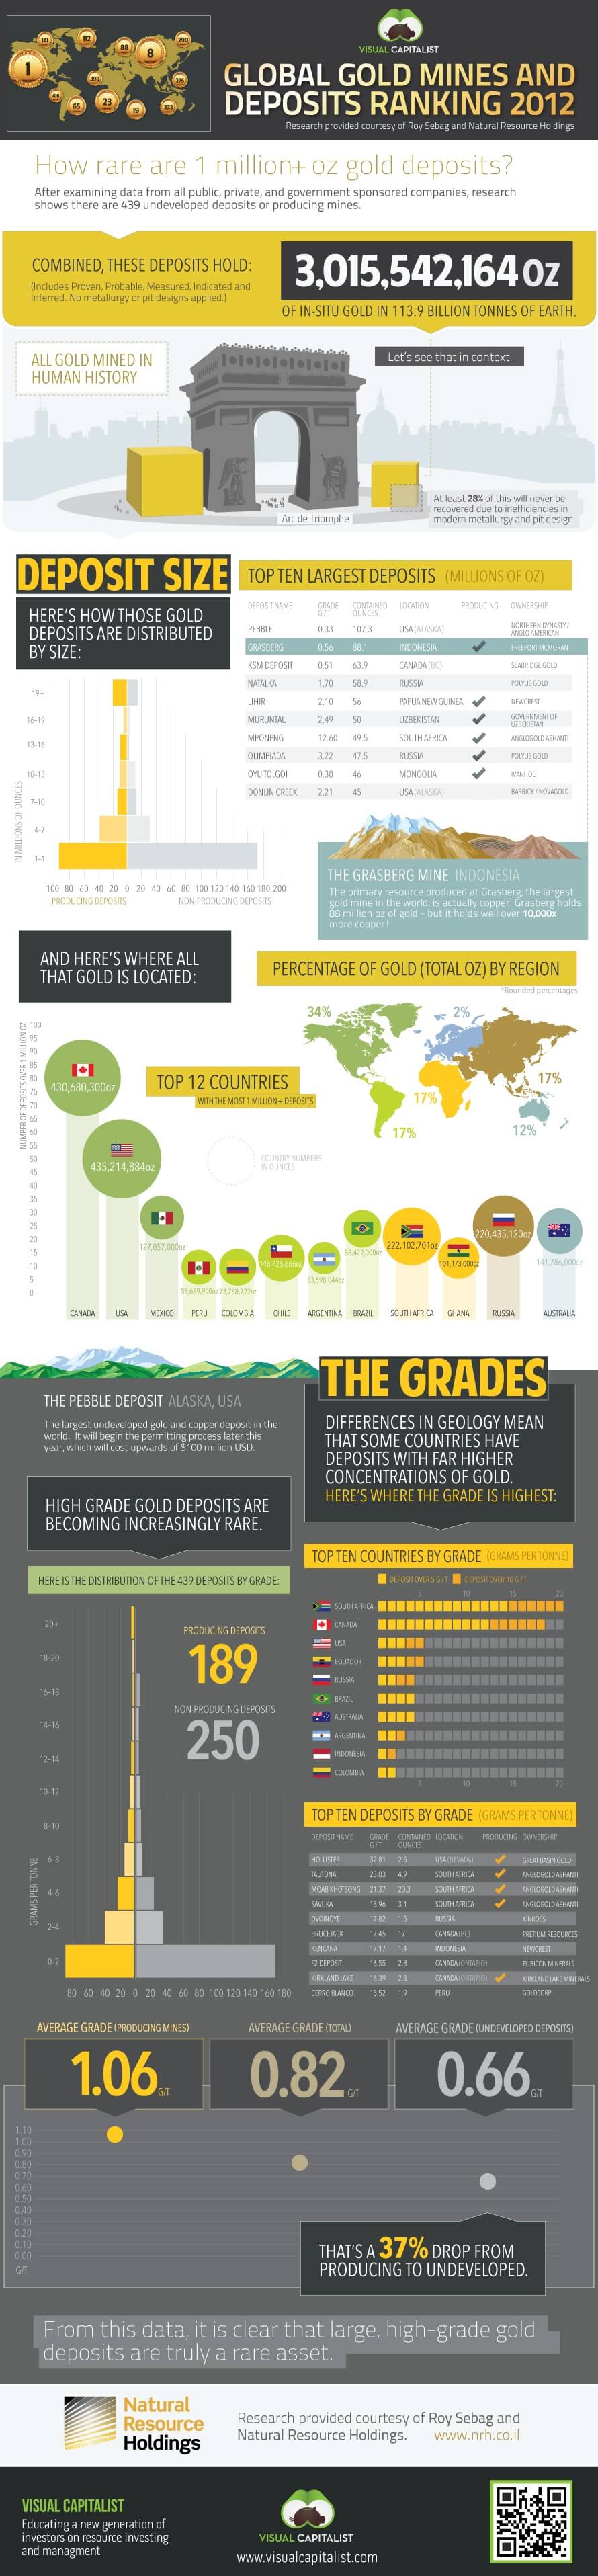 gold-mines-deposits-ranking-2012-infographic-5